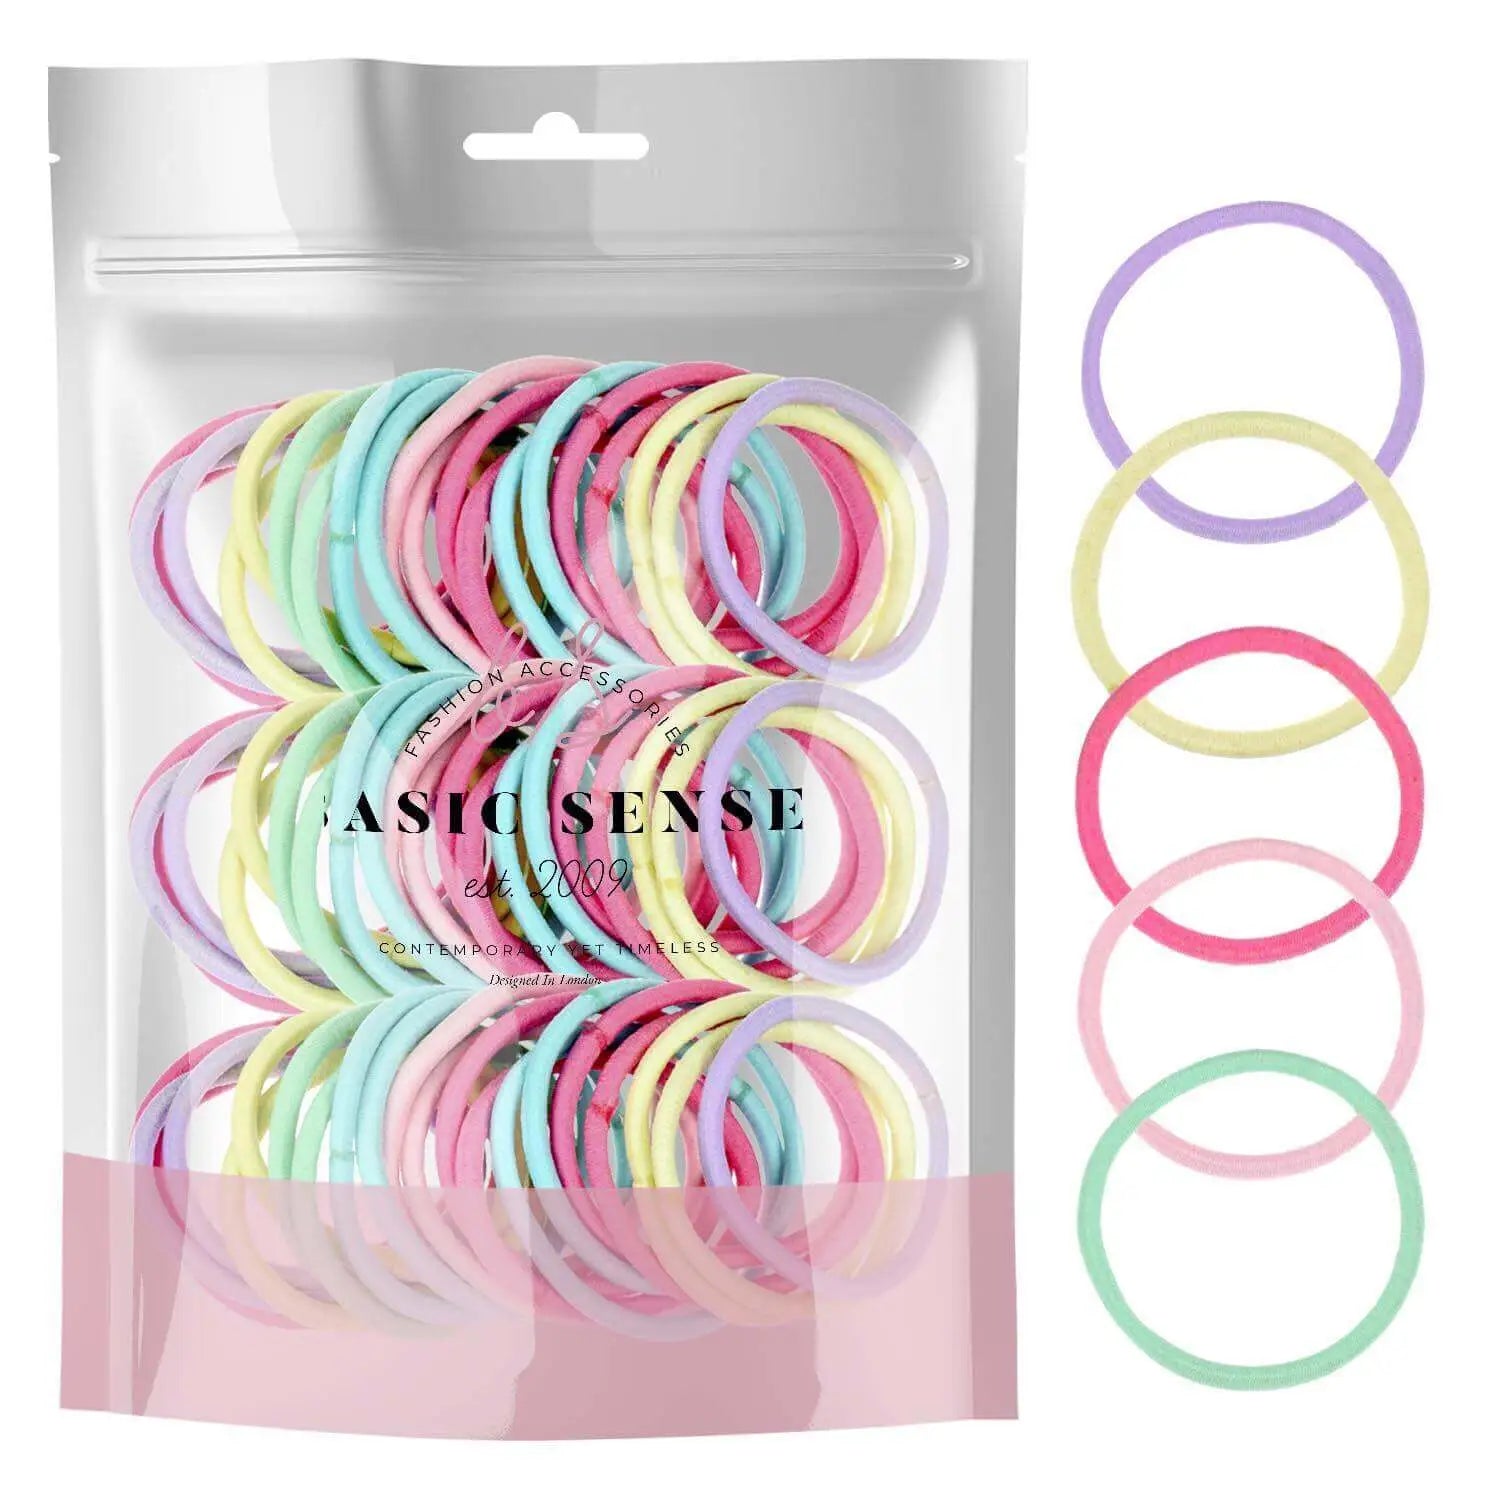 Assorted colored 3mm soft elastic hair ties in bag, white background.